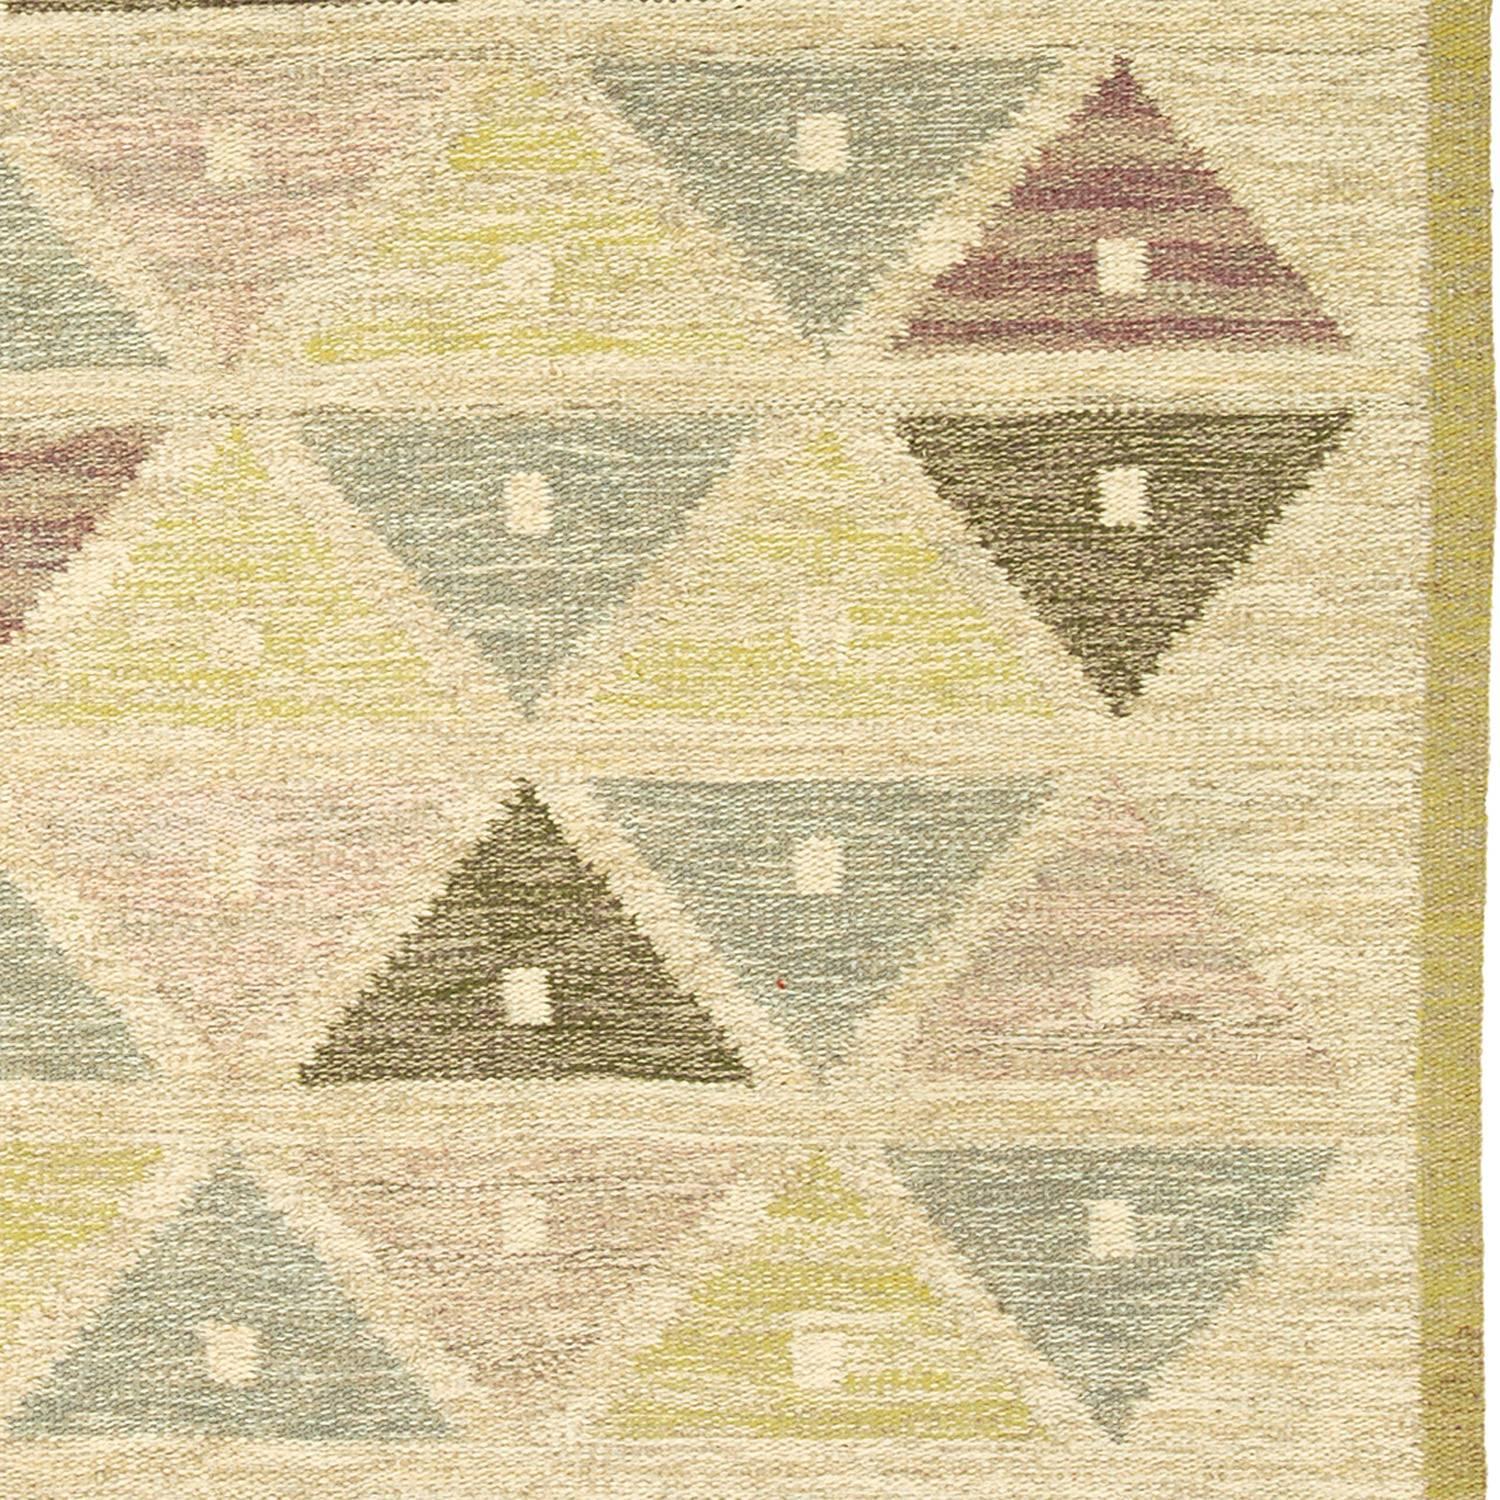 Mid-20th Century Swedish Flat-Weave Carpet by Sigvard Bernadotte In Excellent Condition For Sale In New York, NY